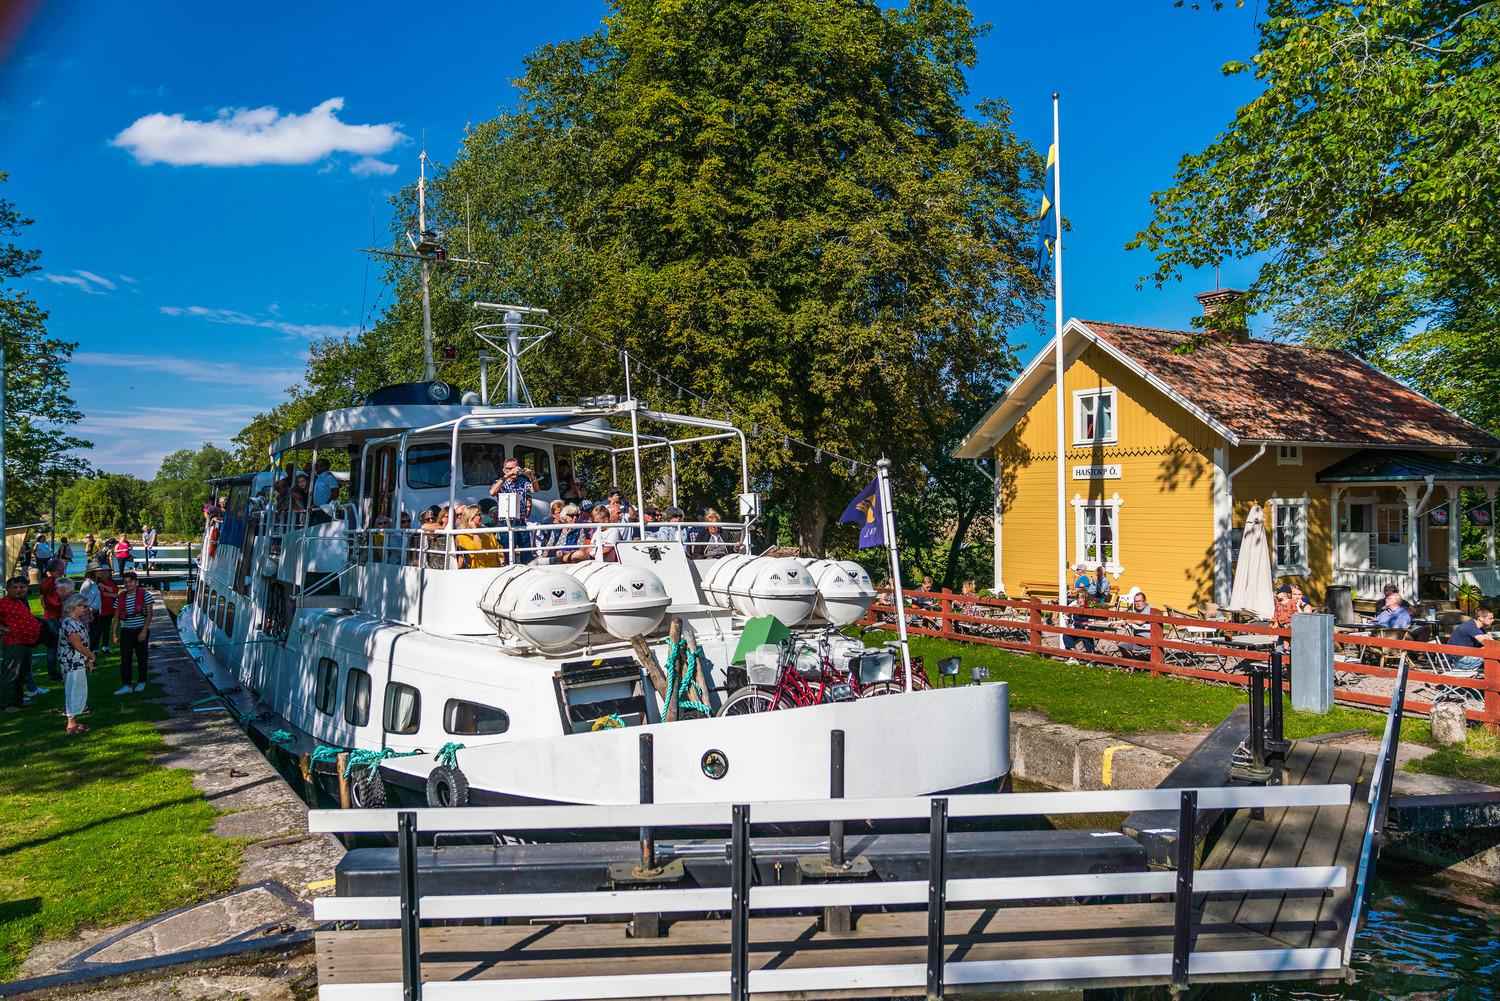 A large white boat passes by the yellow wooden house of Hajstorp hostel and café.